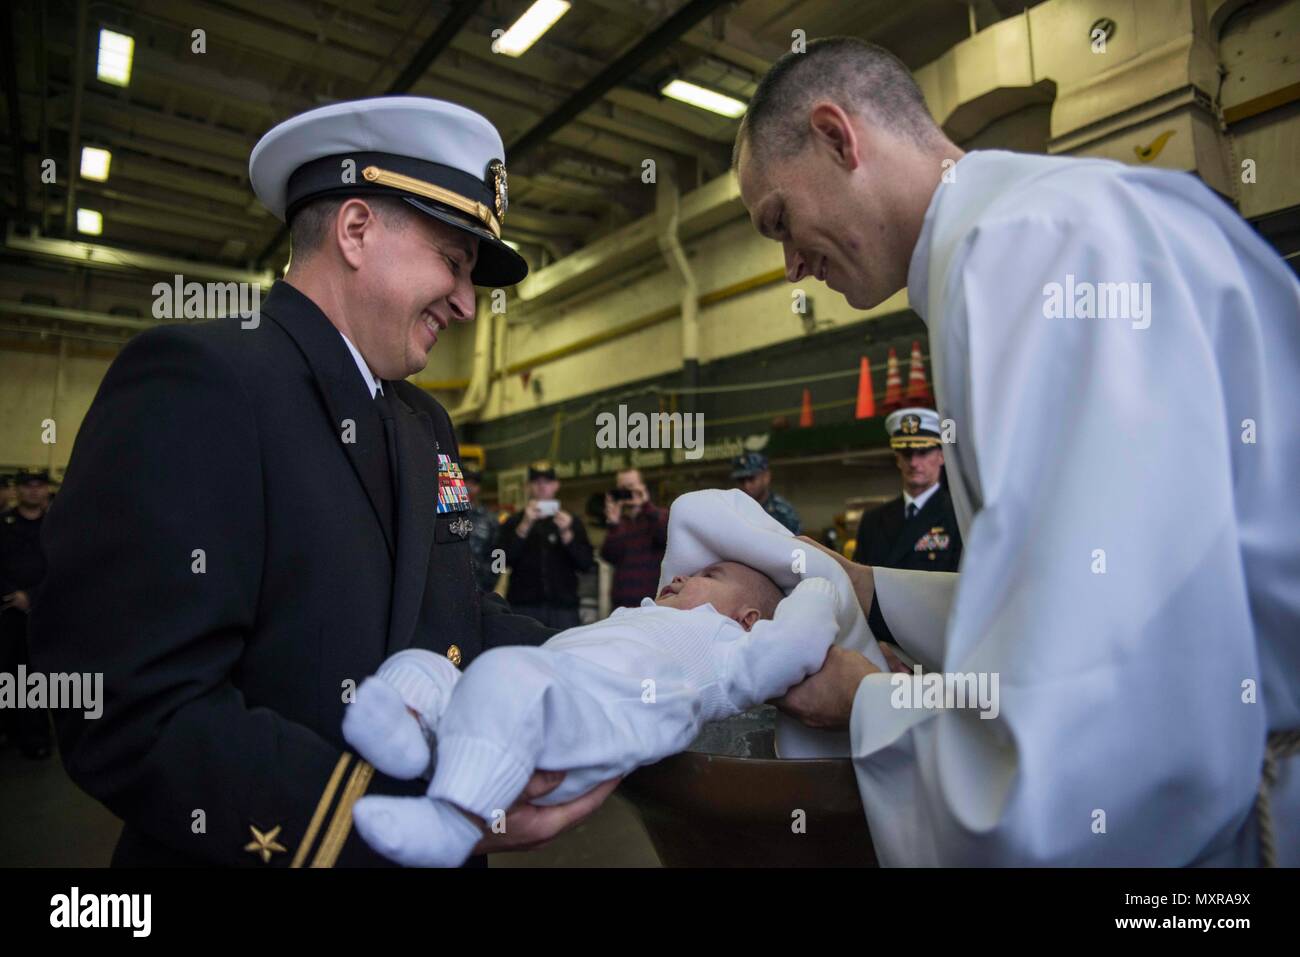 161128-N-JH293-074 SASEBO, Japan (Nov. 28, 2016) Lt. j.g. Brian Caplan has his son baptized in the bell of the amphibious transport dock ship USS Green Bay (LPD 20). Caplan’s son, Theo, was the first newborn to be baptized inside Green Bay’s bell. Conducting baptisms is a Navy tradition that dates back several hundred years to its origins in the British Royal Navy. Green Bay, forward-deployed to Sasebo, Japan, is serving forward to provide a rapid-response capability in the event of a regional contingency or natural disaster. (U.S. Navy photo by Petty Officer 1st Class Chris Williamson/Release Stock Photo